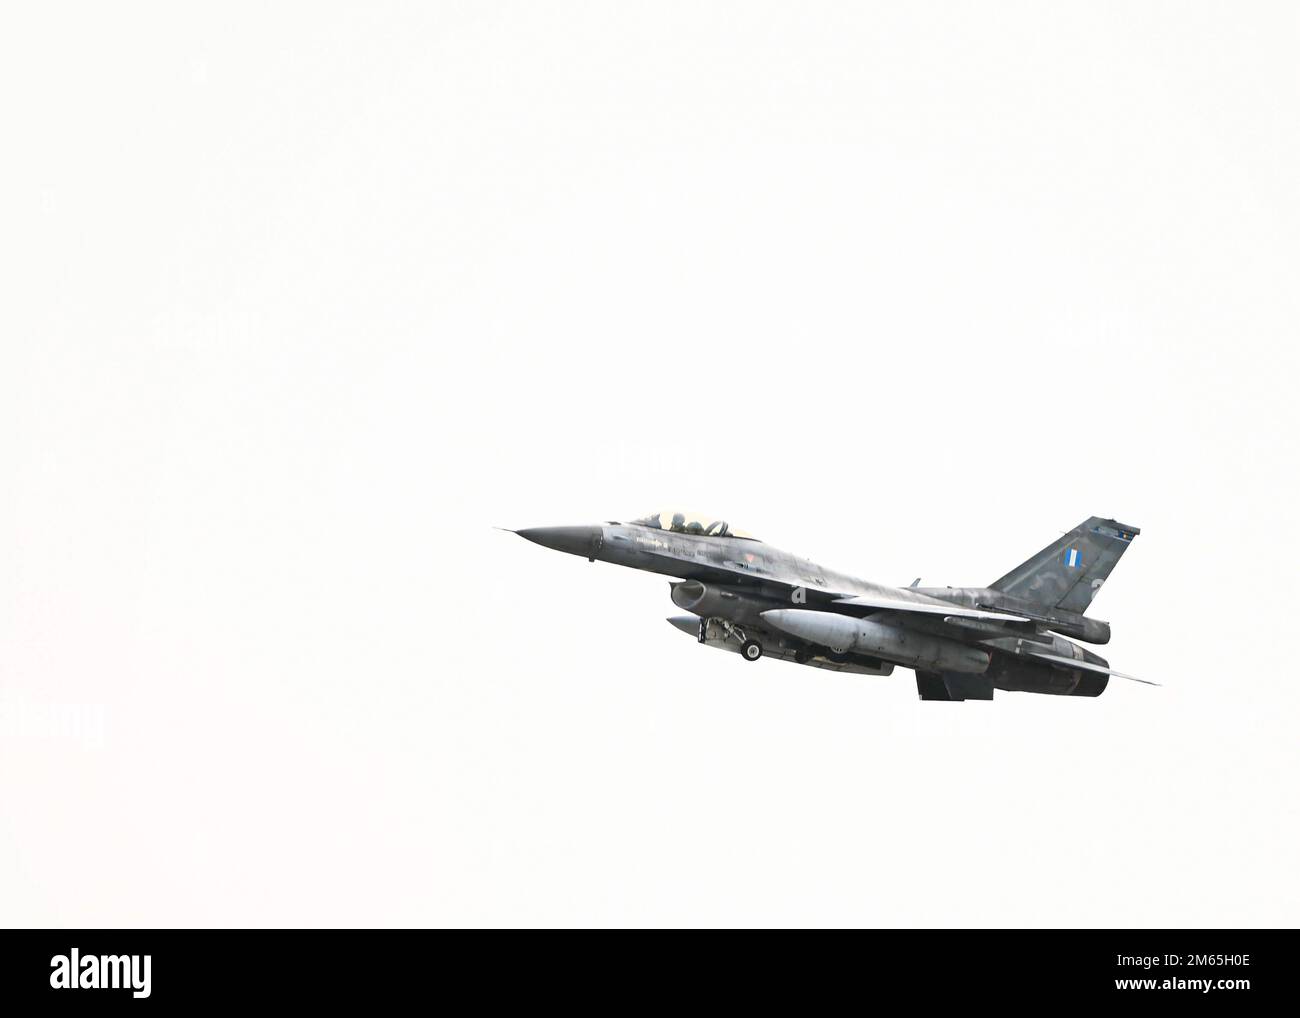 A Hellenic air force F-16 takes off April 4, 2022, at Andravida Air Base, Greece. The U.S., Cyprus, France, Israel, Romania, Italy, Slovenia, Austria and Canada supported and participate in the multinational exercise, INIOCHOS 22, a Hellenic air force-led operational and tactical level field training exercise, hosted by the Hellenic Air Tactics Center at Greece’s fighter weapons school. Stock Photo